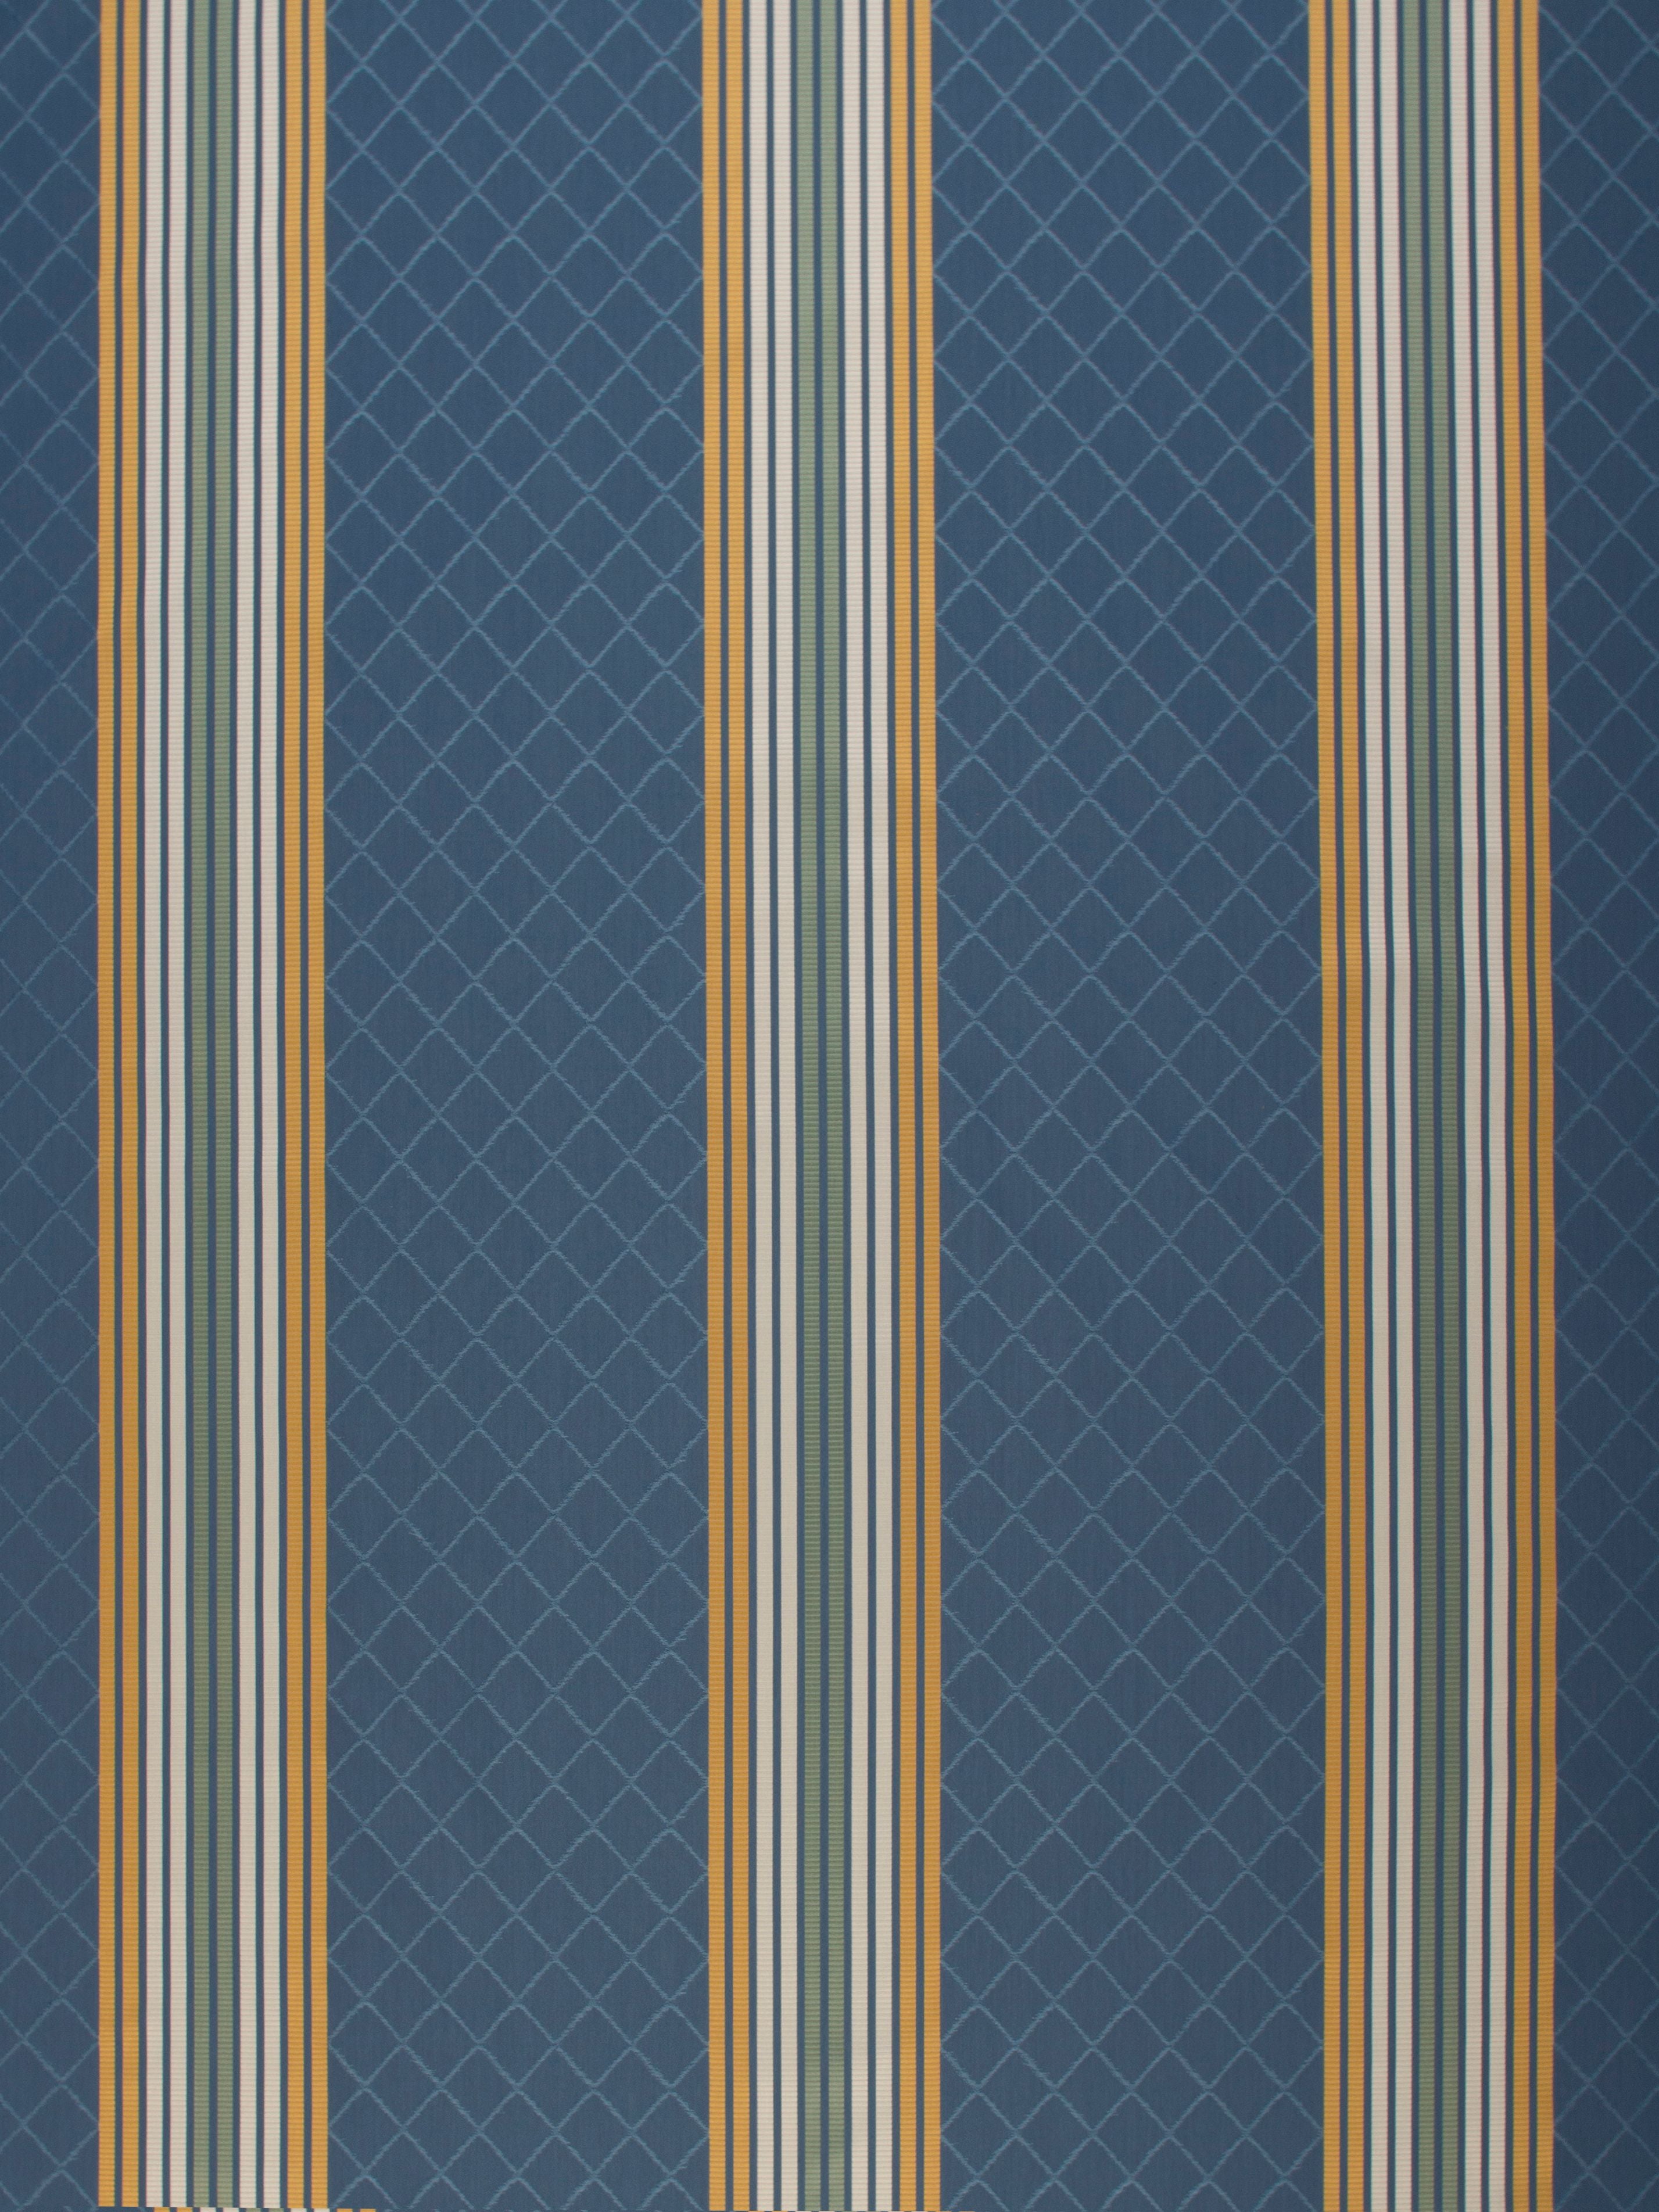 Roquebrune fabric in ocean color - pattern number HA 00081268 - by Scalamandre in the Old World Weavers collection